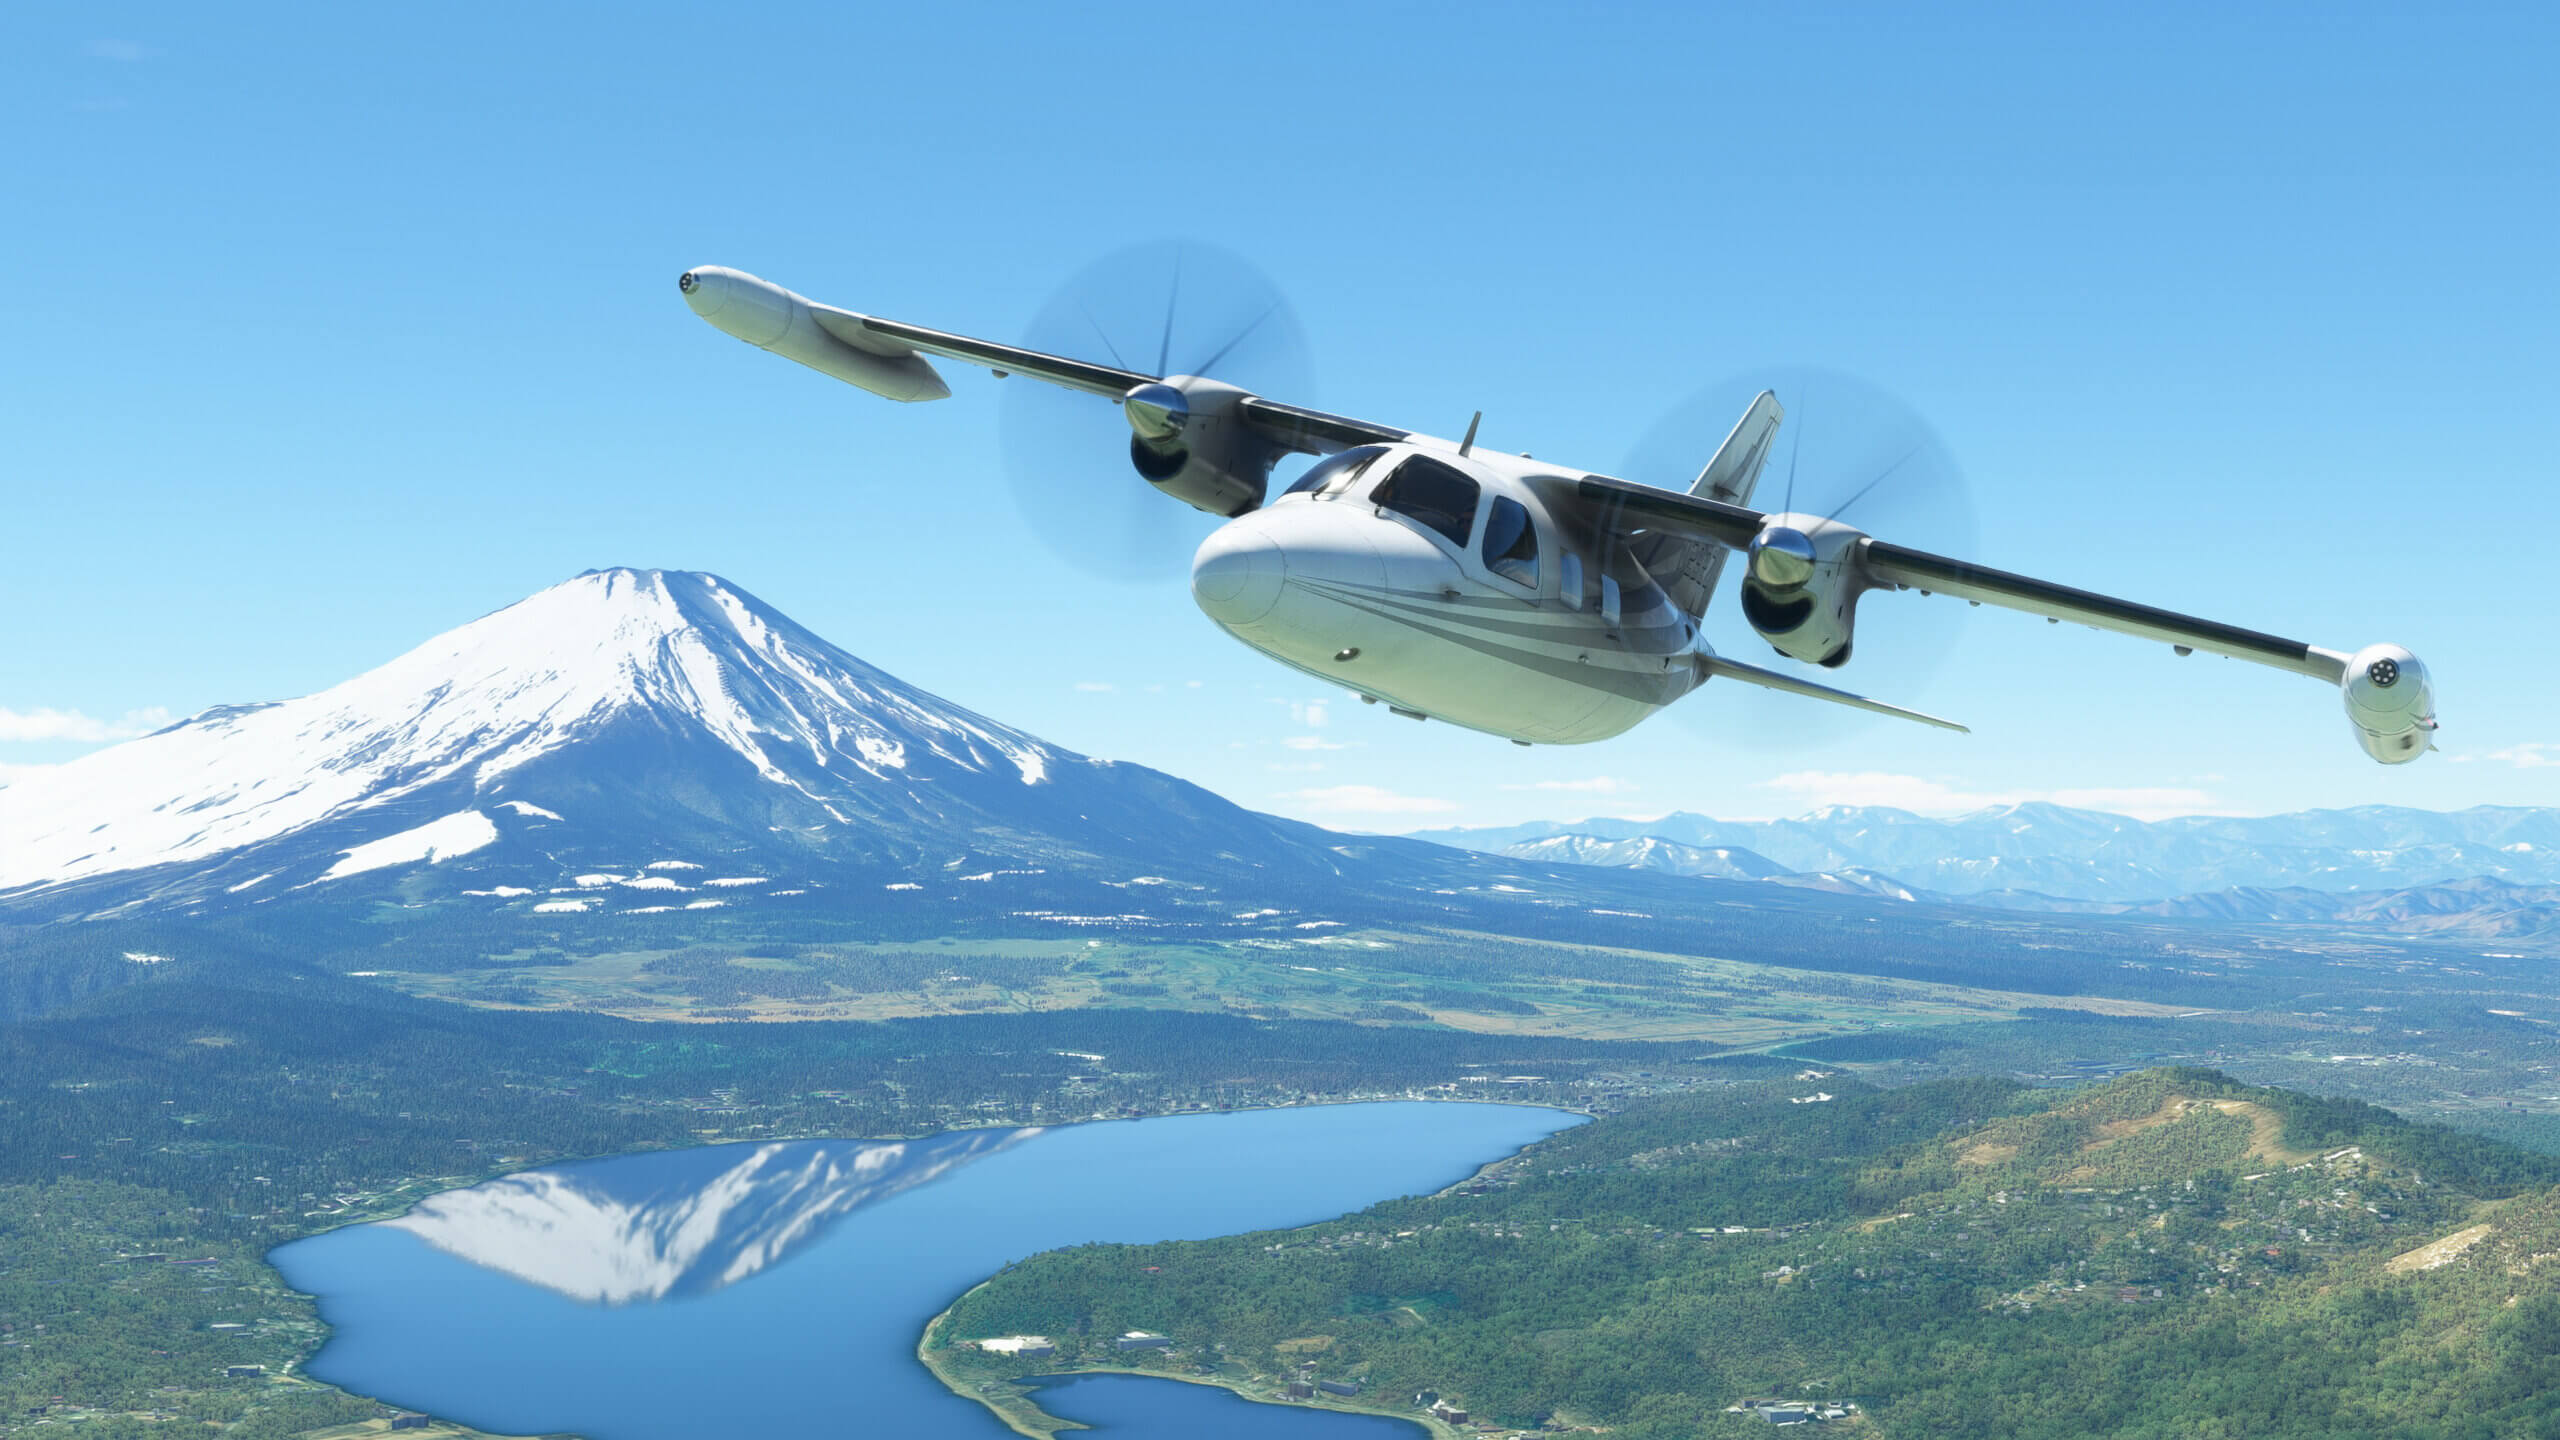 A Mitsubishi Heavy Industries MU-2 flies with Mount Fuji in the background.